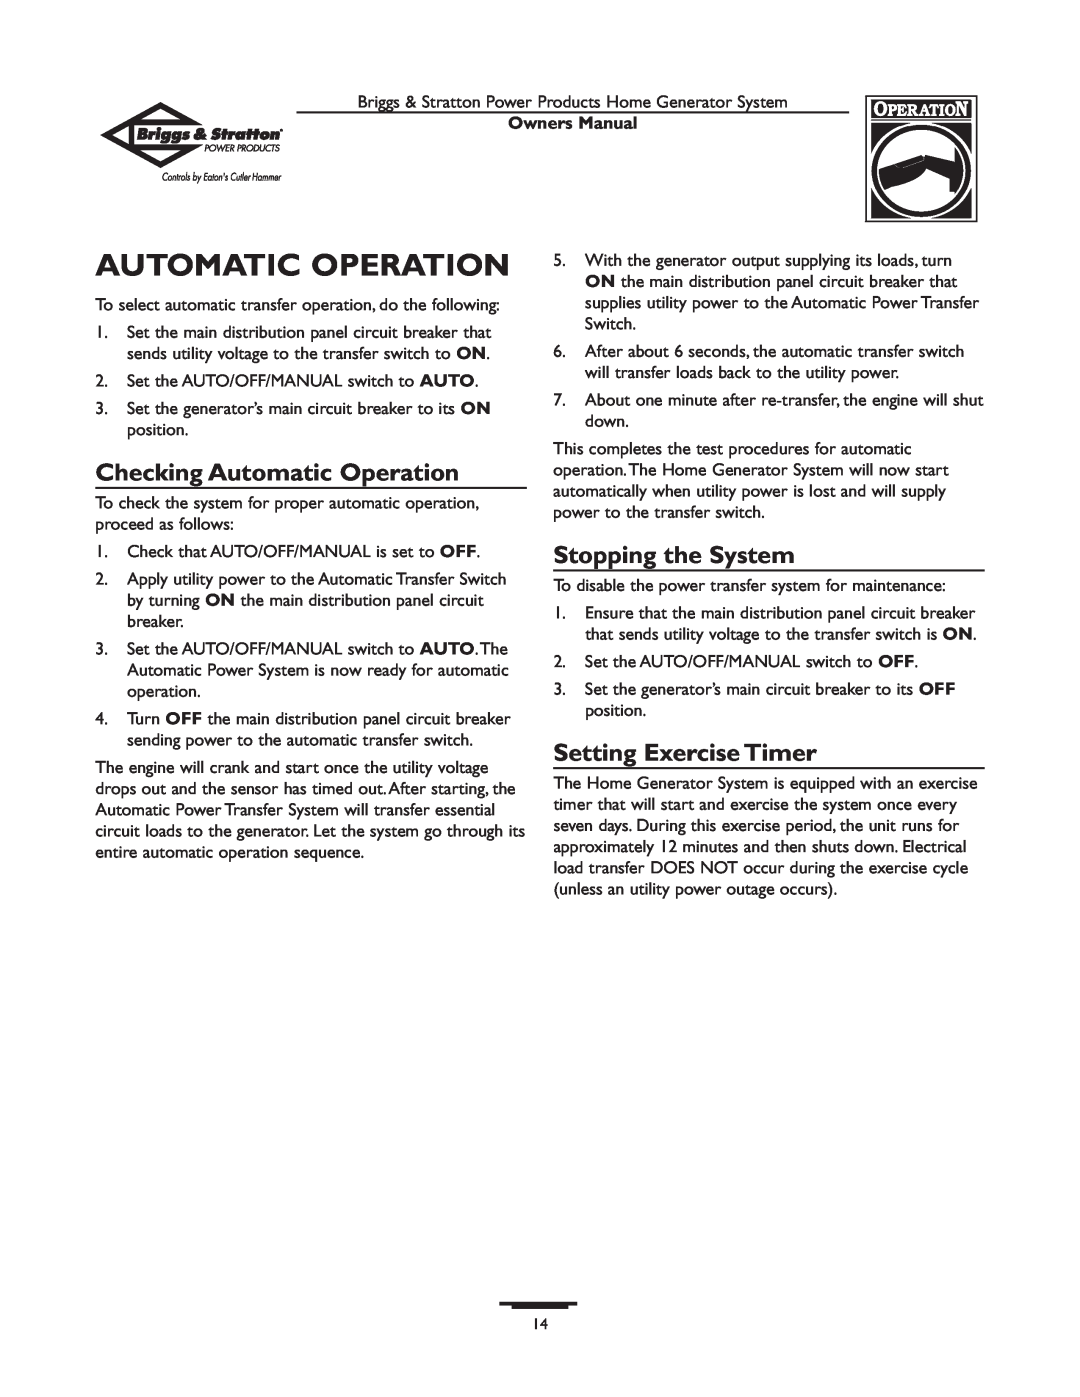 Briggs & Stratton 190839GS Checking Automatic Operation, Stopping the System, Setting Exercise Timer, Owners Manual 